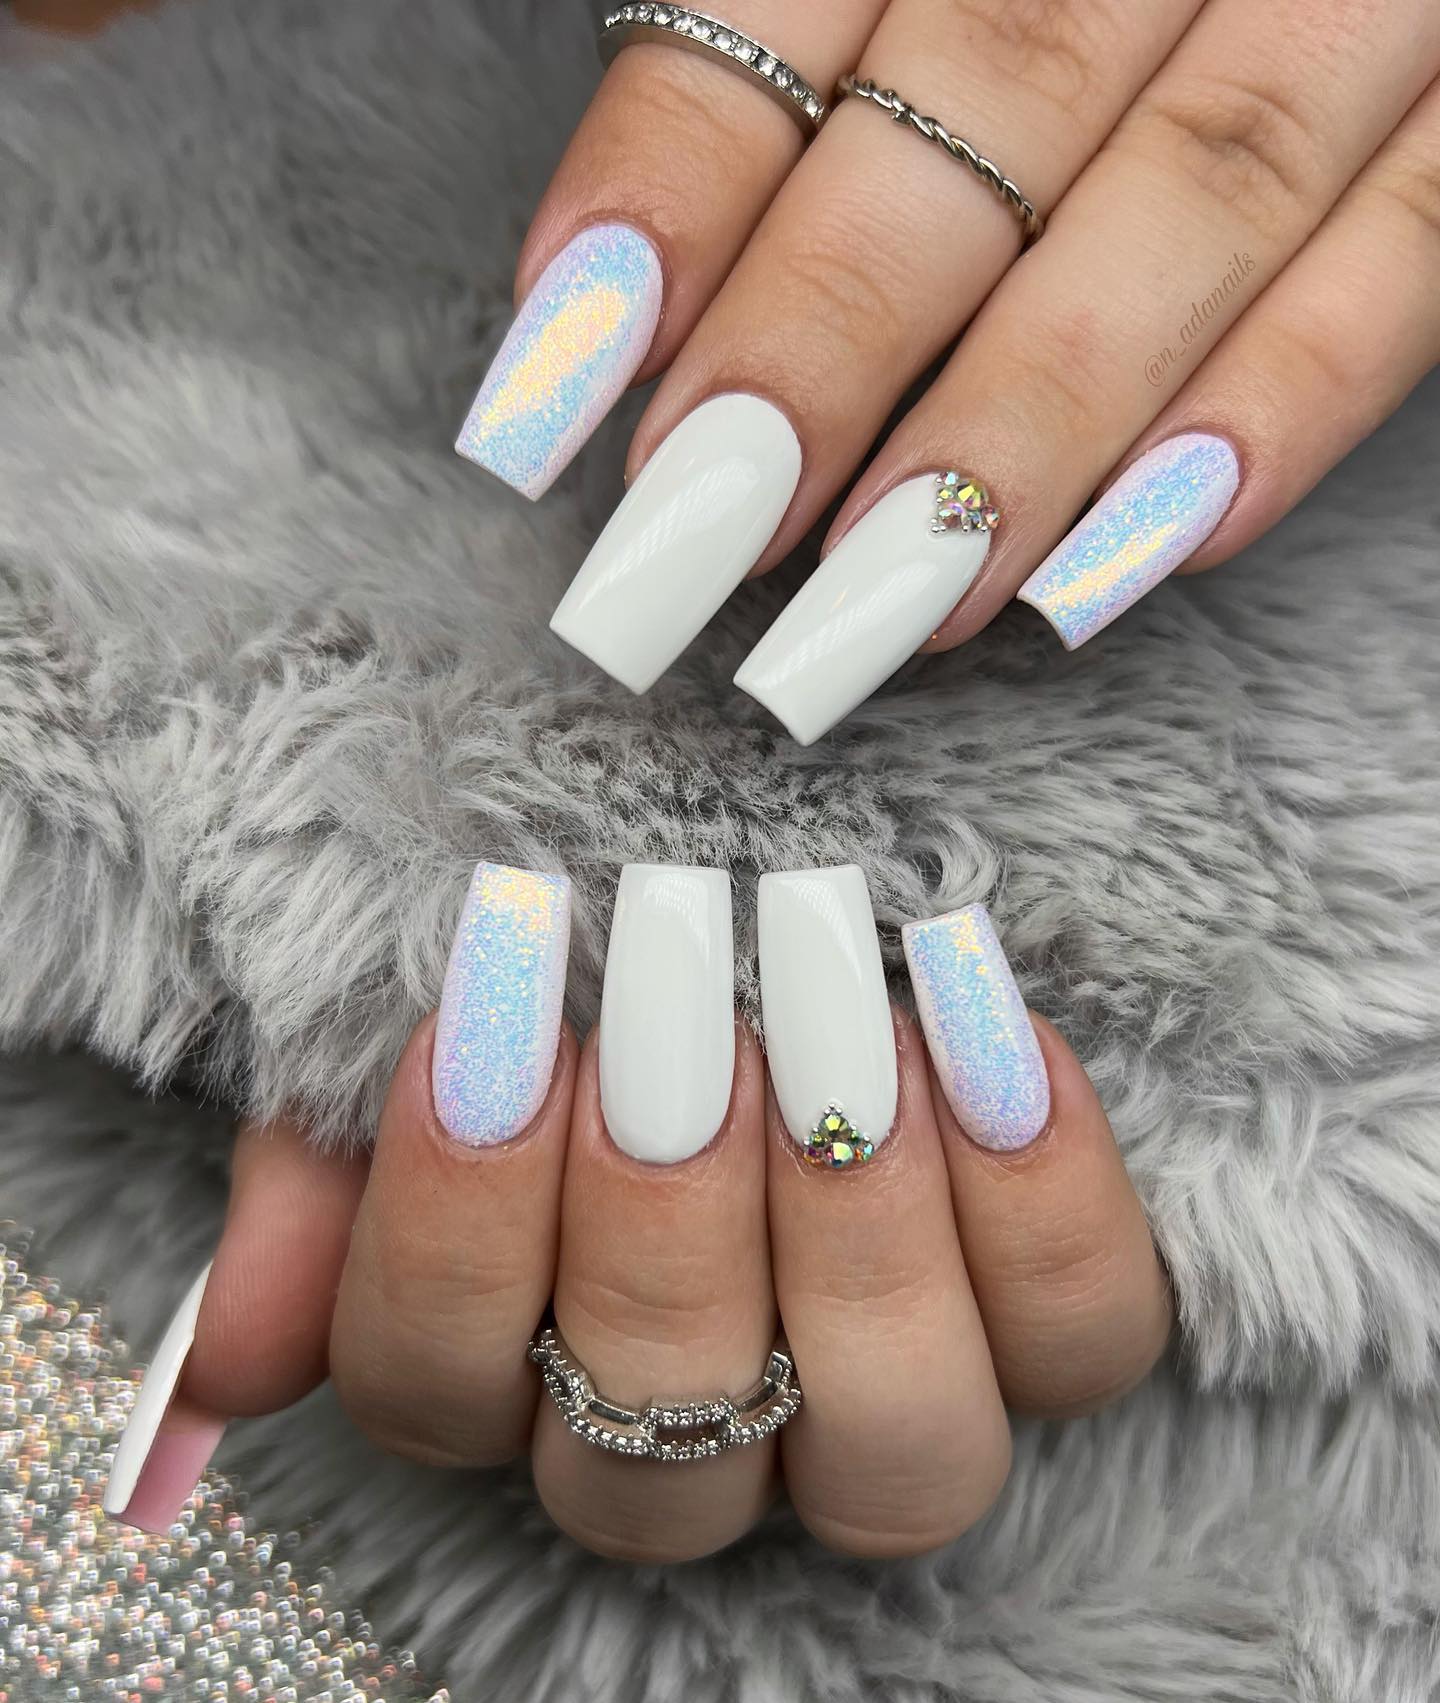 100 Timeless White Nail Art Ideas For A Chic & Classic Look